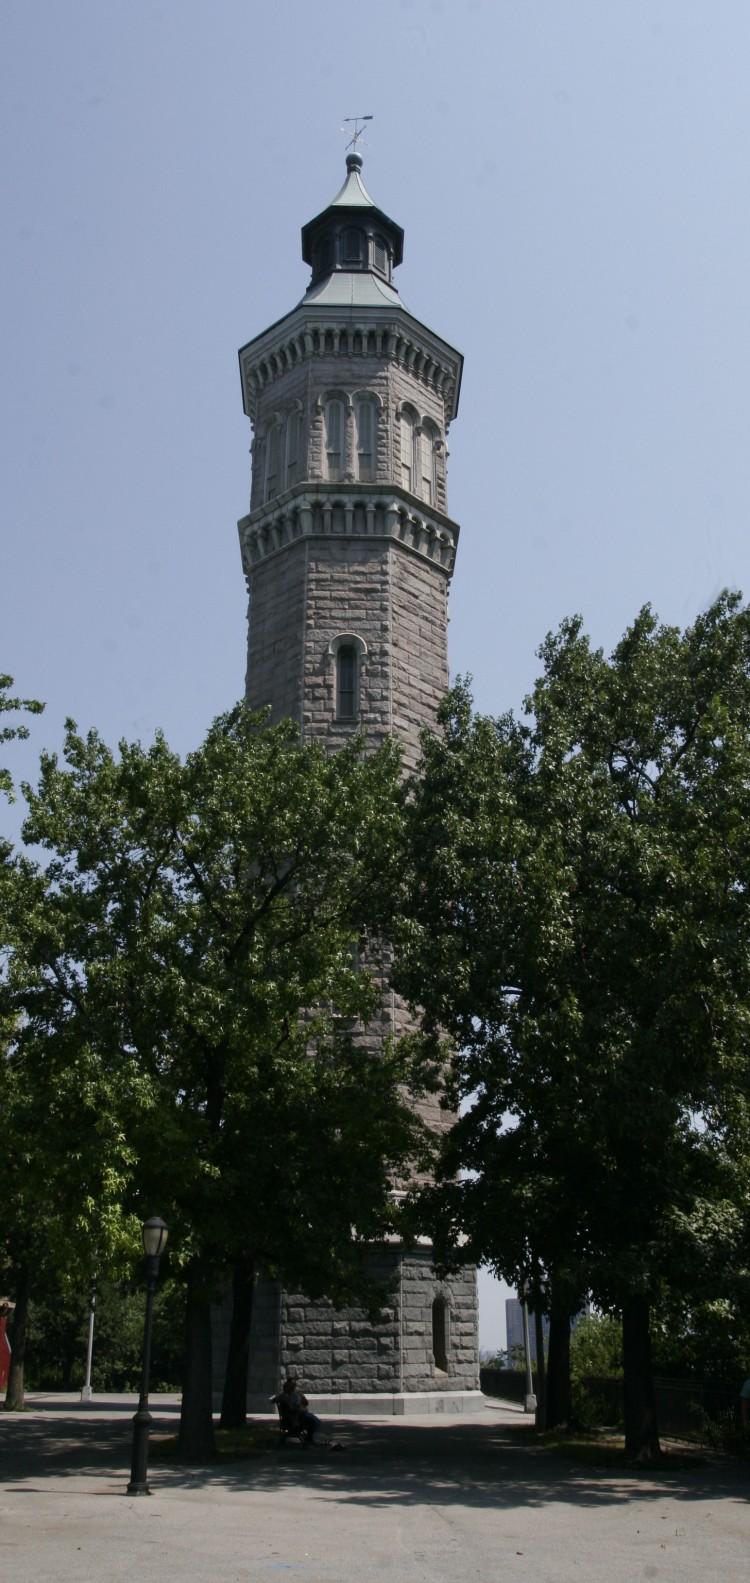 <a><img src="https://www.theepochtimes.com/assets/uploads/2015/09/highbridgewatertower.jpg" alt="PICTURESQUE: The Highbridge Water tower was built in 1872 to help bring water to residents of northern Manhattan.   (Tim McDevitt/The Epoch Times)" title="PICTURESQUE: The Highbridge Water tower was built in 1872 to help bring water to residents of northern Manhattan.   (Tim McDevitt/The Epoch Times)" width="400" class="size-medium wp-image-1799959"/></a>